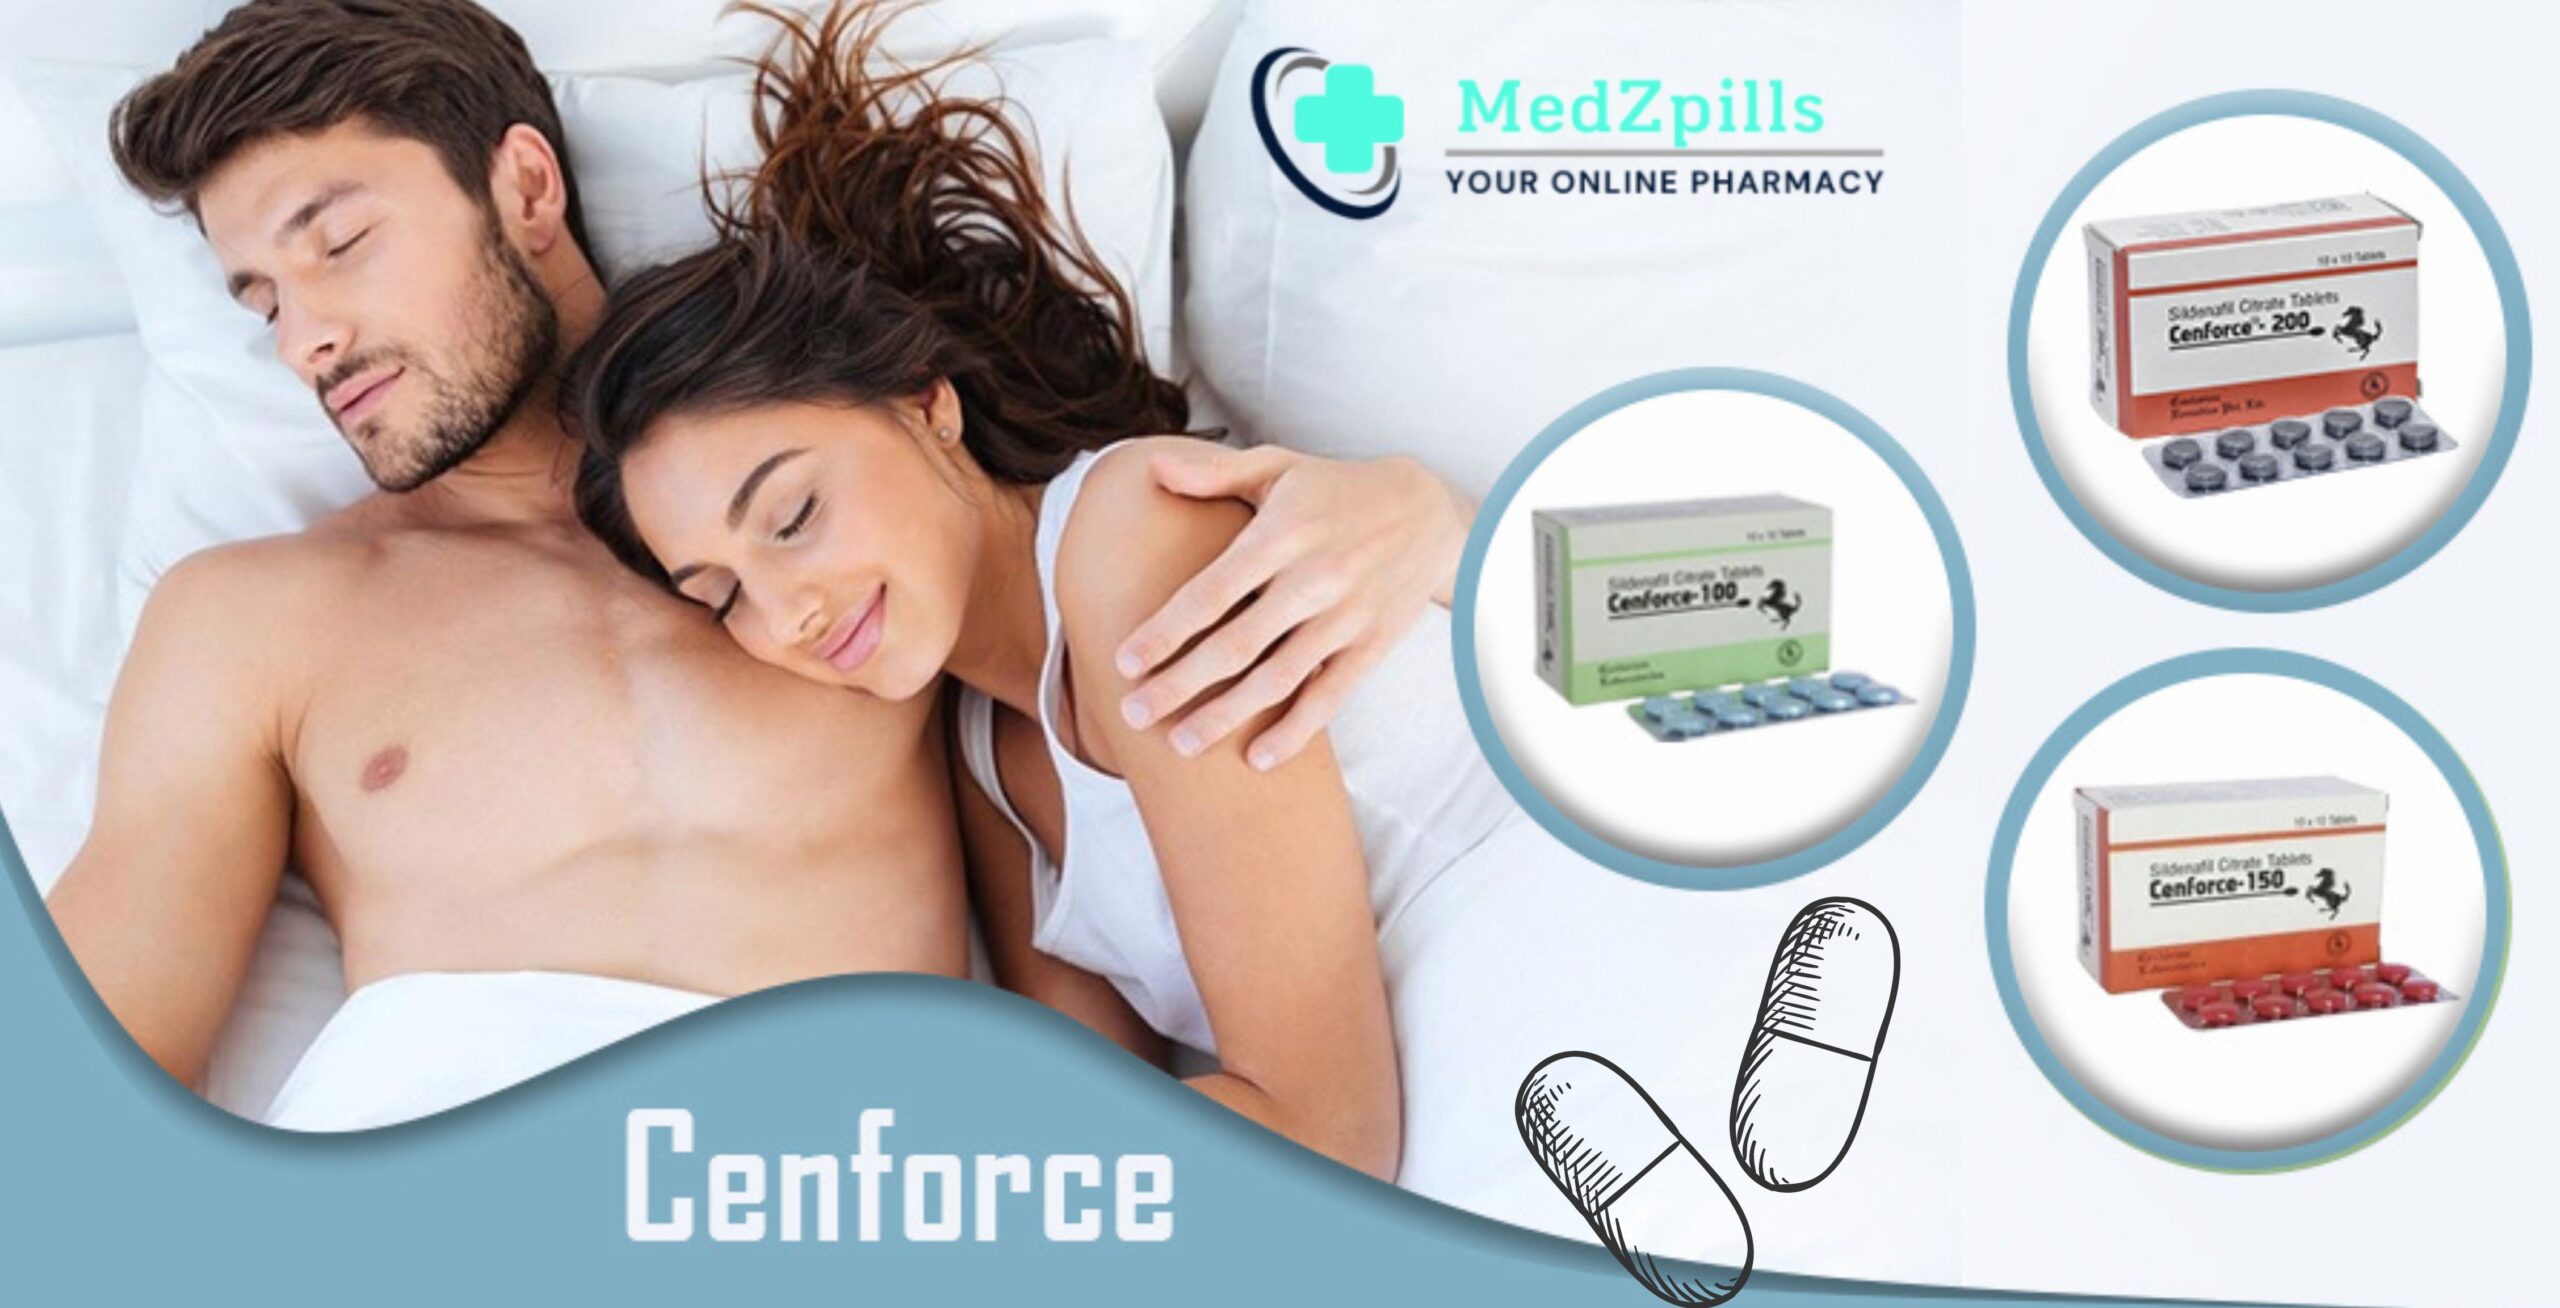 Cenforce: A Potential Answer to Depression Caused by ED?